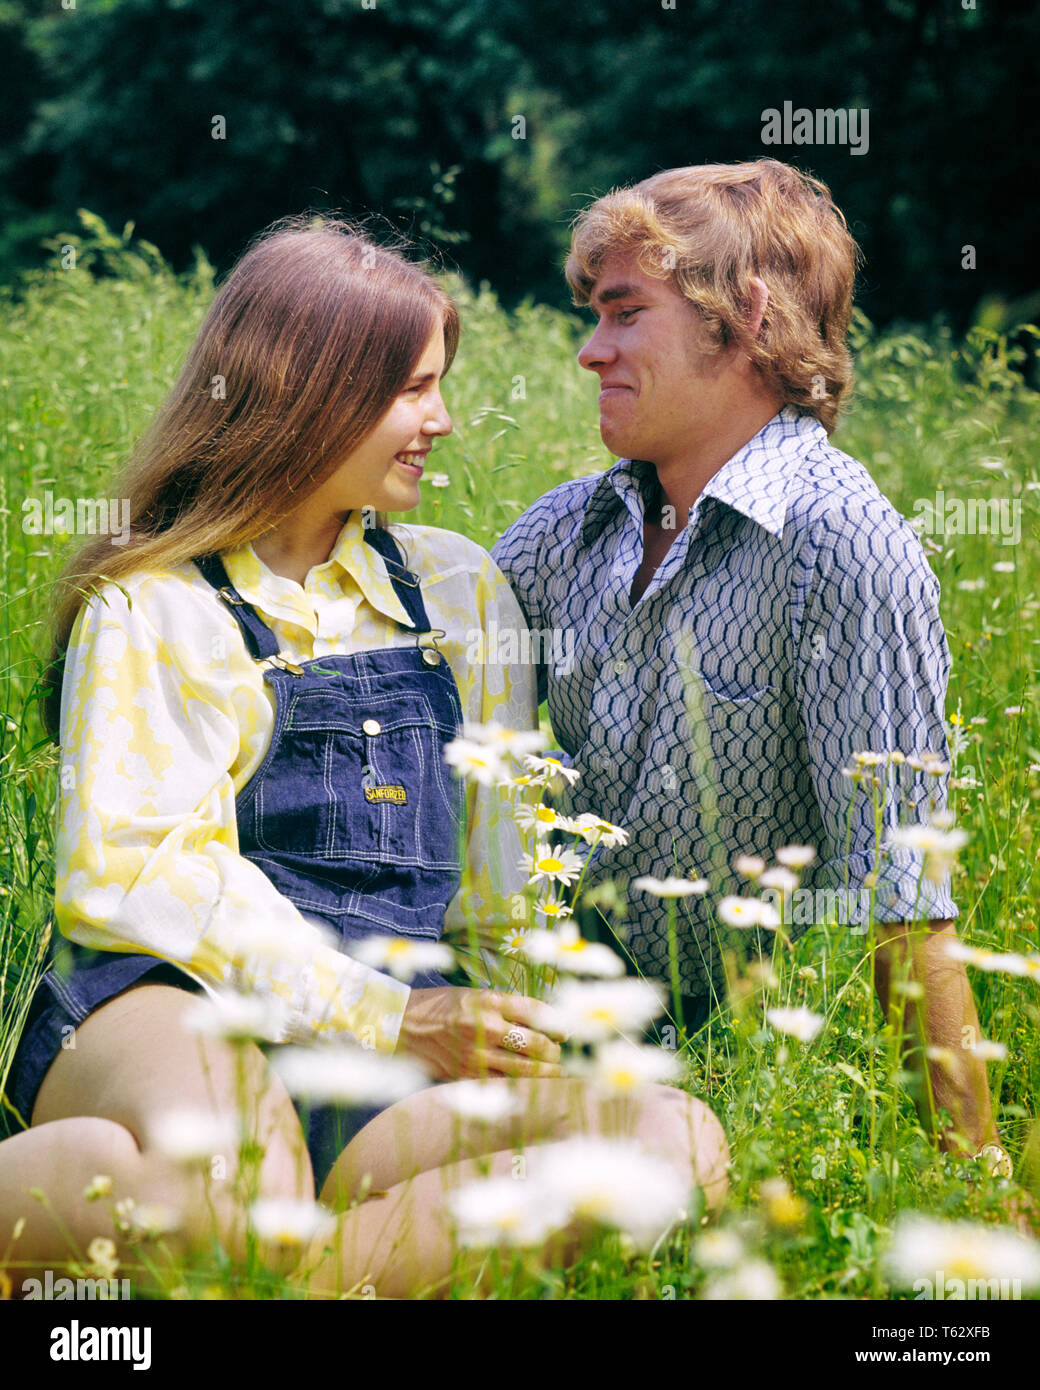 1970s SMILING ROMANTIC TEEN COUPLE SITTING TOGETHER IN FIELD OF DAISIES AND WILD FLOWERS - kj6263 HAR001 HARS NOSTALGIA OLD FASHION 1 JUVENILE FACIAL COMMUNICATION STRONG WILD PLEASED JOY LIFESTYLE FEMALES RURAL HALF-LENGTH PERSONS CARING MALES TEENAGE GIRL TEENAGE BOY EXPRESSIONS DATING DAISIES TEMPTATION DREAMS HAPPINESS CHEERFUL DISCOVERY AND CHOICE EXCITEMENT IN OF ATTRACTION SMILES CONNECTION COURTSHIP CONCEPTUAL JOYFUL STYLISH TEENAGED PERSONAL ATTACHMENT POSSIBILITY QUEEN ANNE'S LACE AFFECTION EMOTION GROWTH JUVENILES SMIRKING SOCIAL ACTIVITY CAUCASIAN ETHNICITY COURTING HAR001 Stock Photo